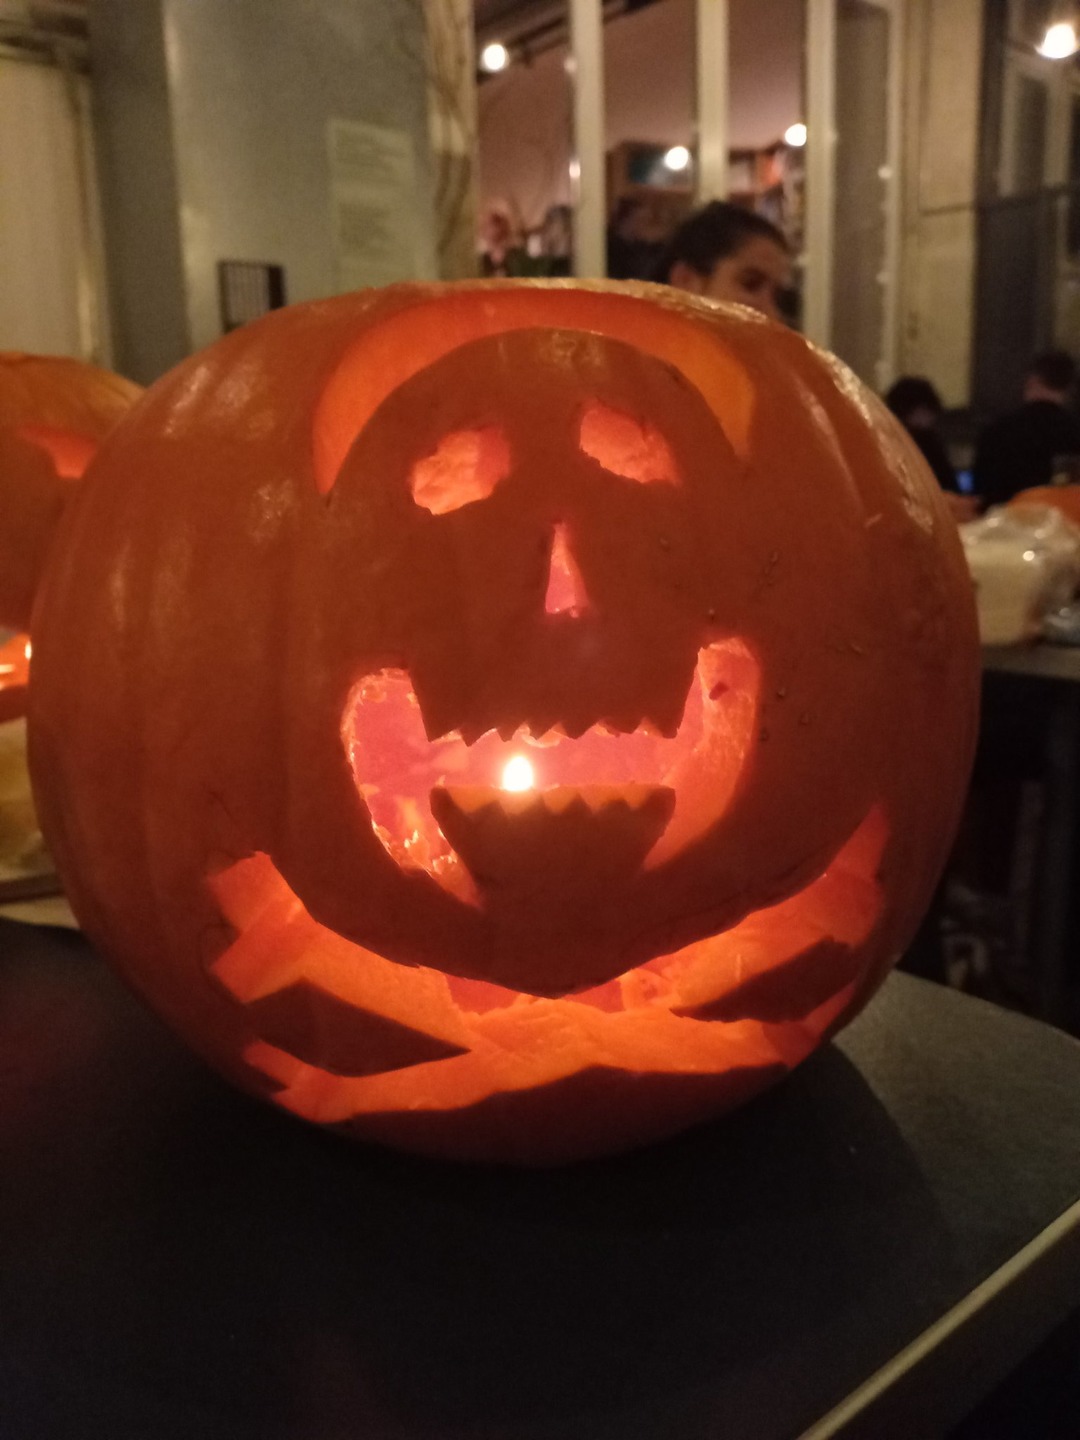 ... the day that you almost caught Captain Jack O'Lantern - meme